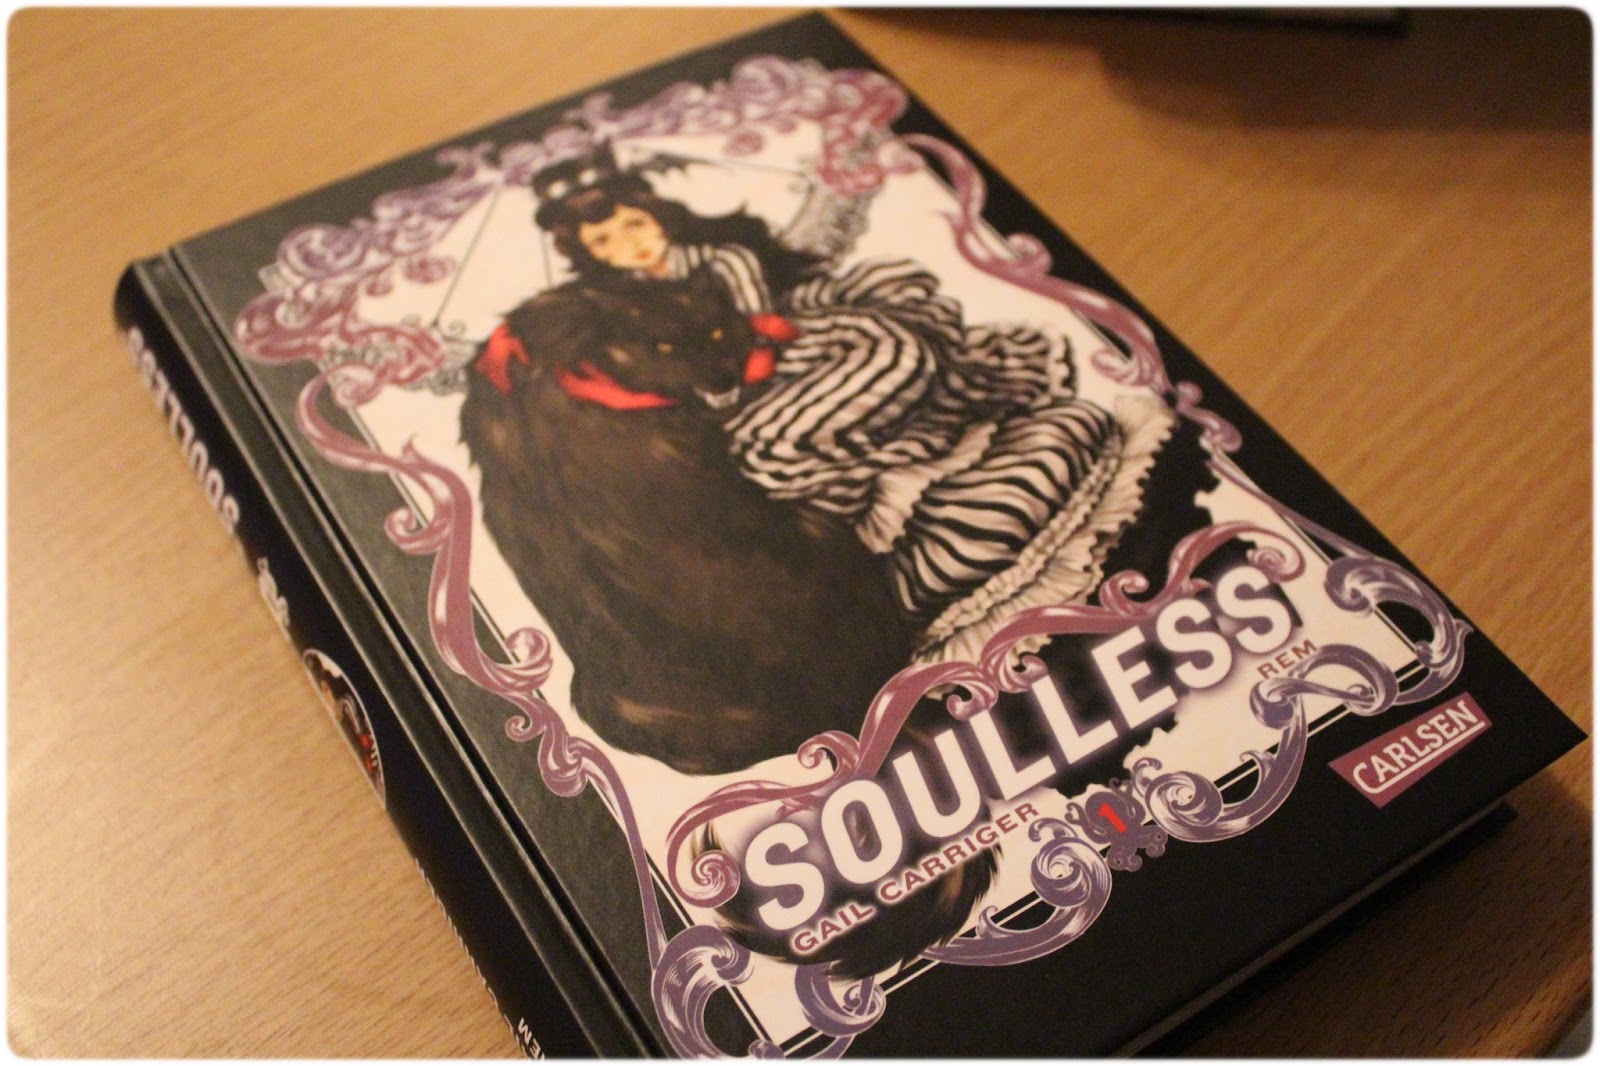 soulless by gail carriger